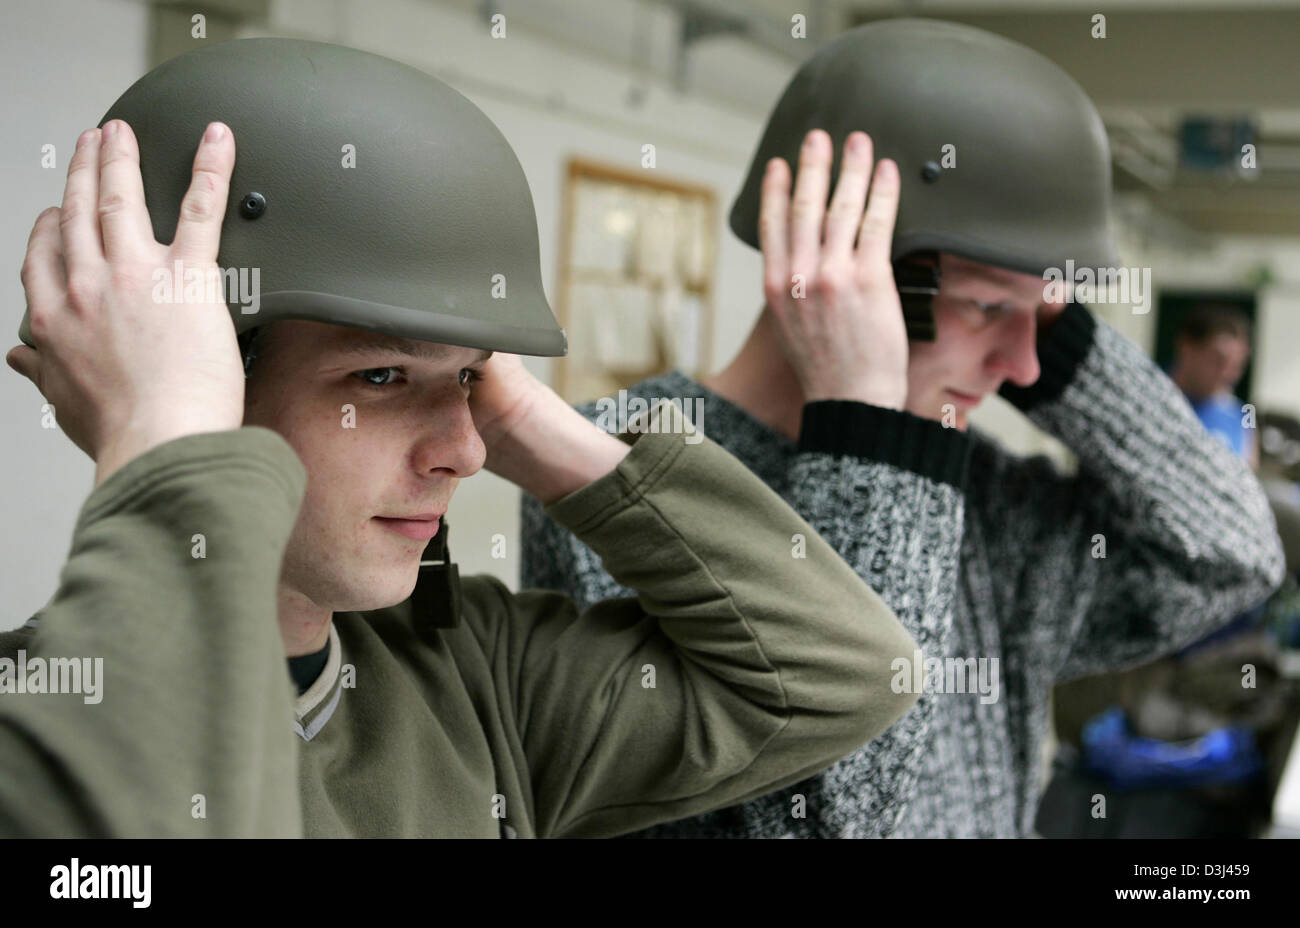 (dpa) - Two conscripts check the fit of their helmets: Dressing of conscripts at the Knuell barracks in Schwarzenborn, Germany, 4 April 2005. Stock Photo